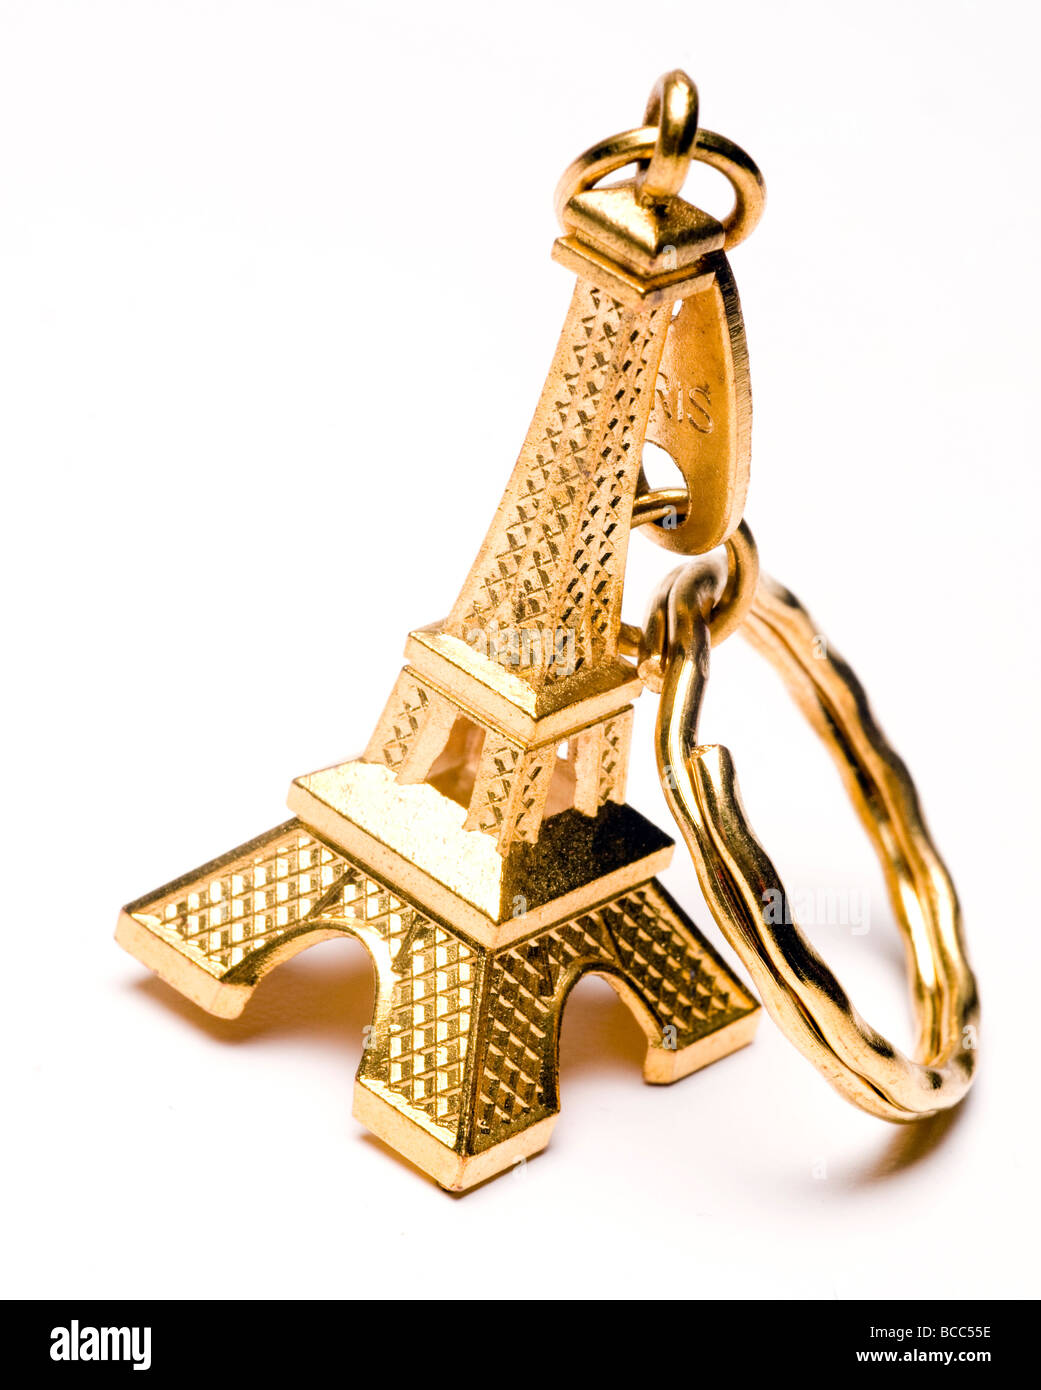 souvenir key chain of mini eiffel tower in gold from paris france Stock Photo